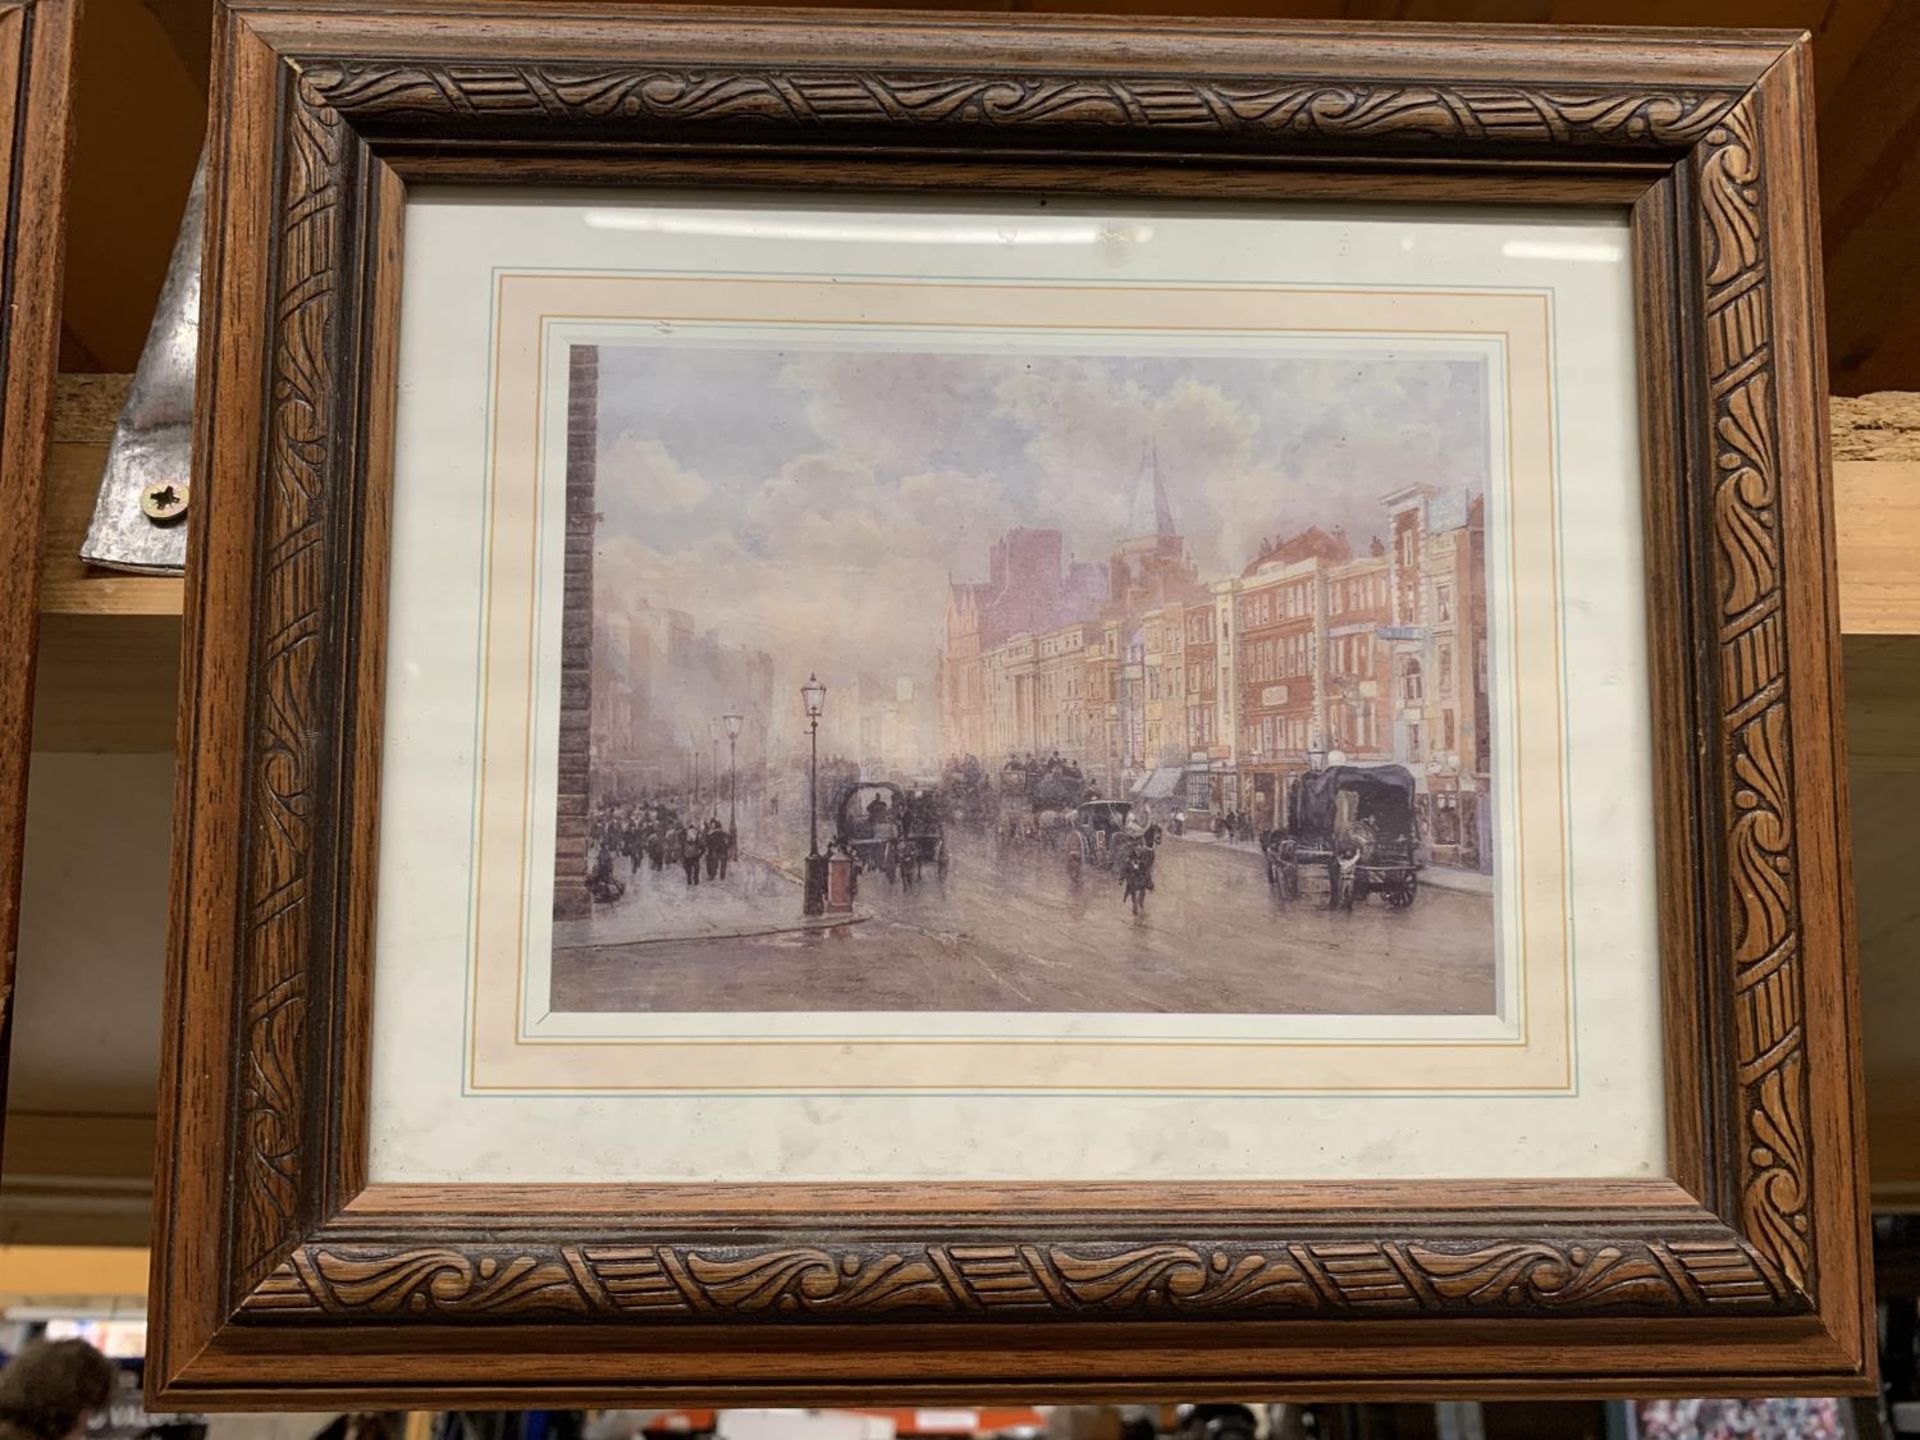 TWO VINTAGE STYLE CITY PRINTS, FRAMED - Image 3 of 3